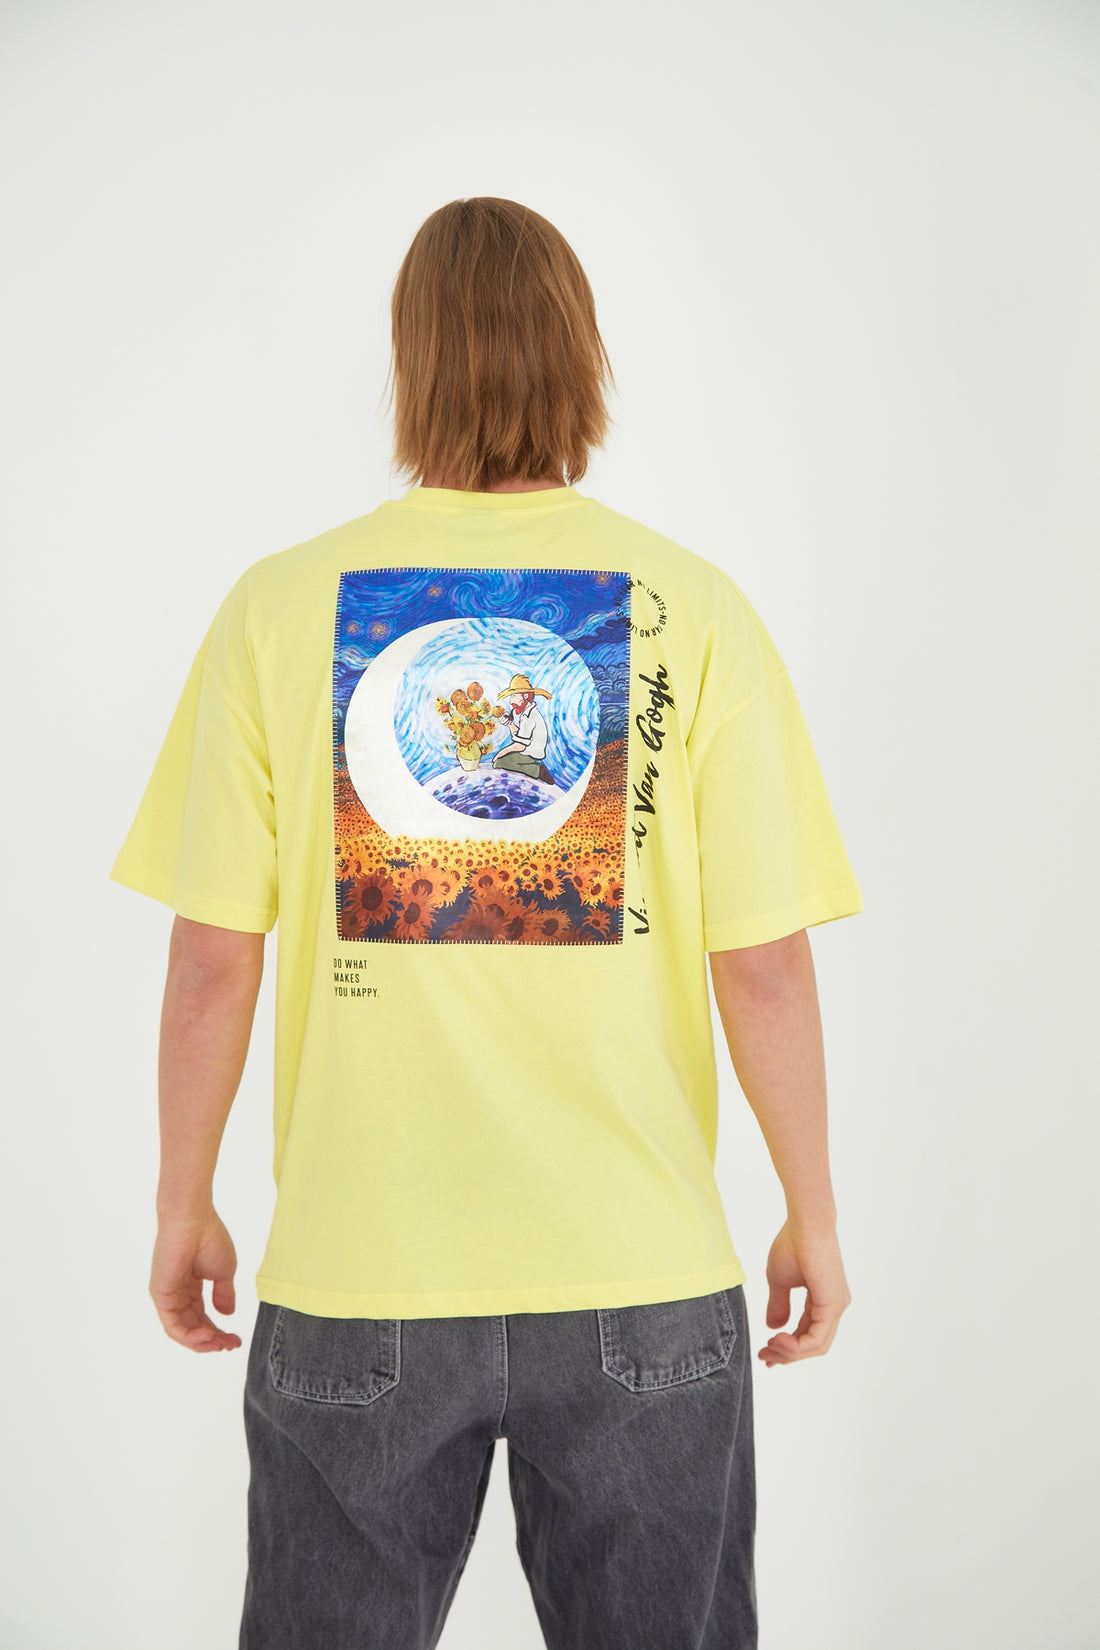 T-SHIRT - DO WHAT MAKES YOU HAPPY - YELLOW